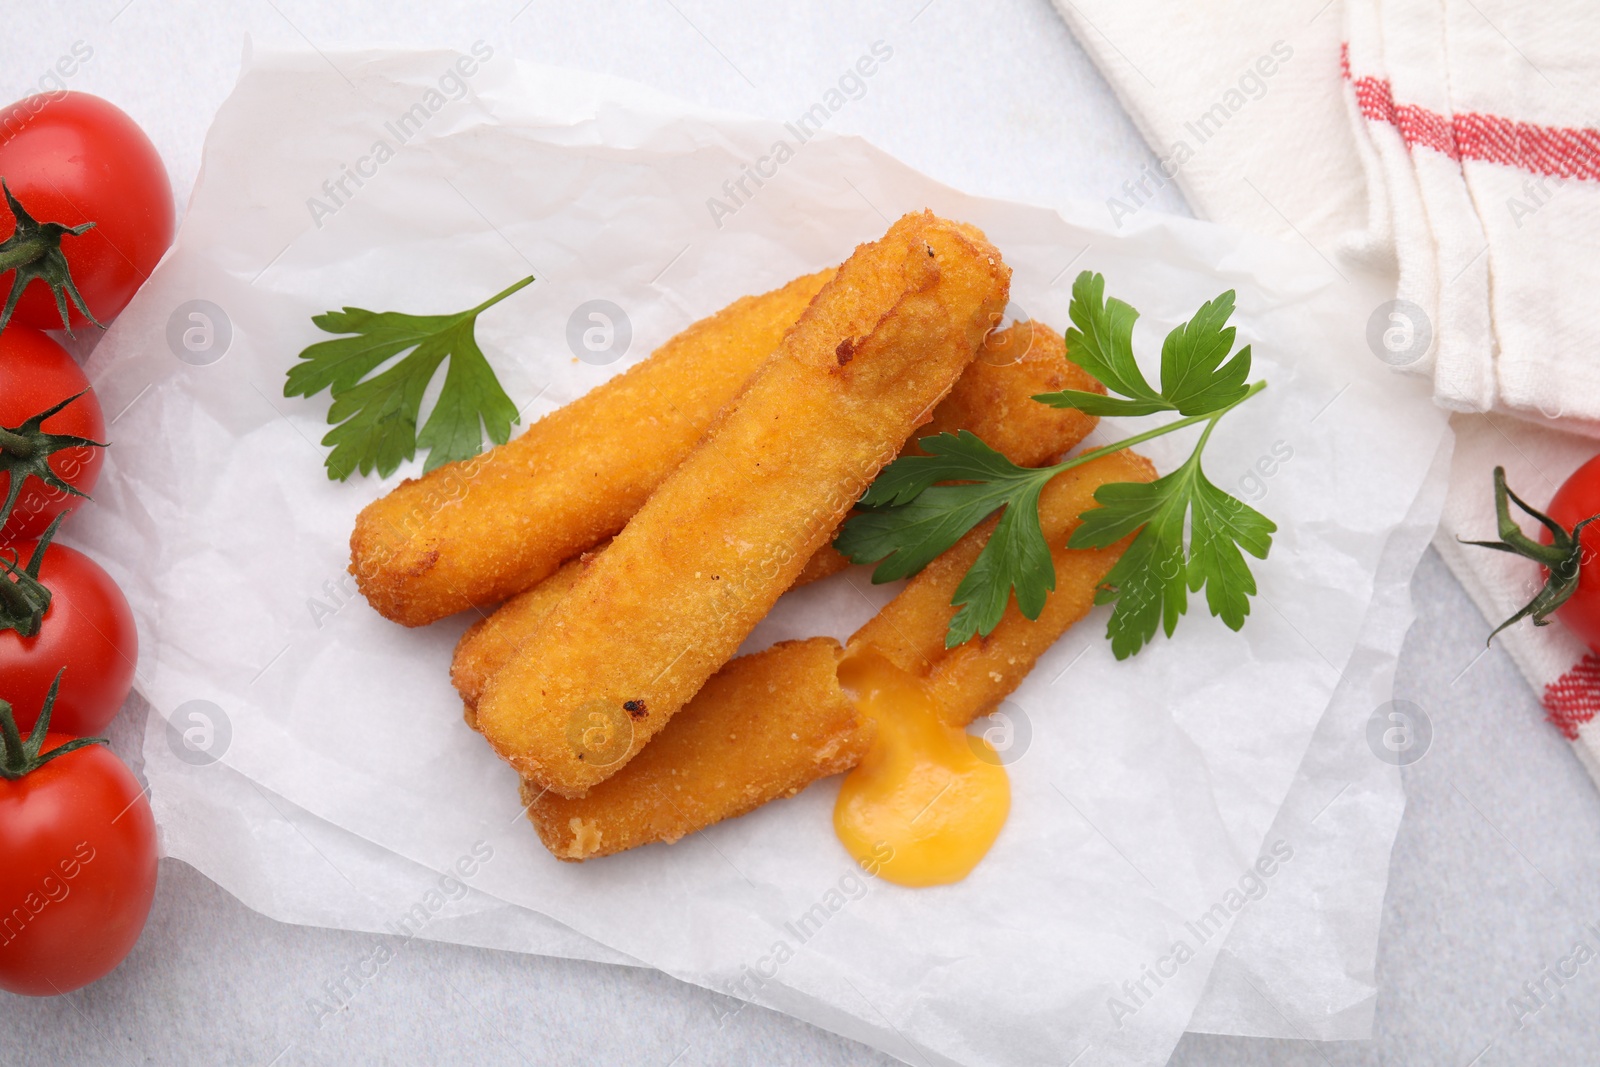 Photo of Tasty fried mozzarella sticks, tomatoes and parsley on light table, above view